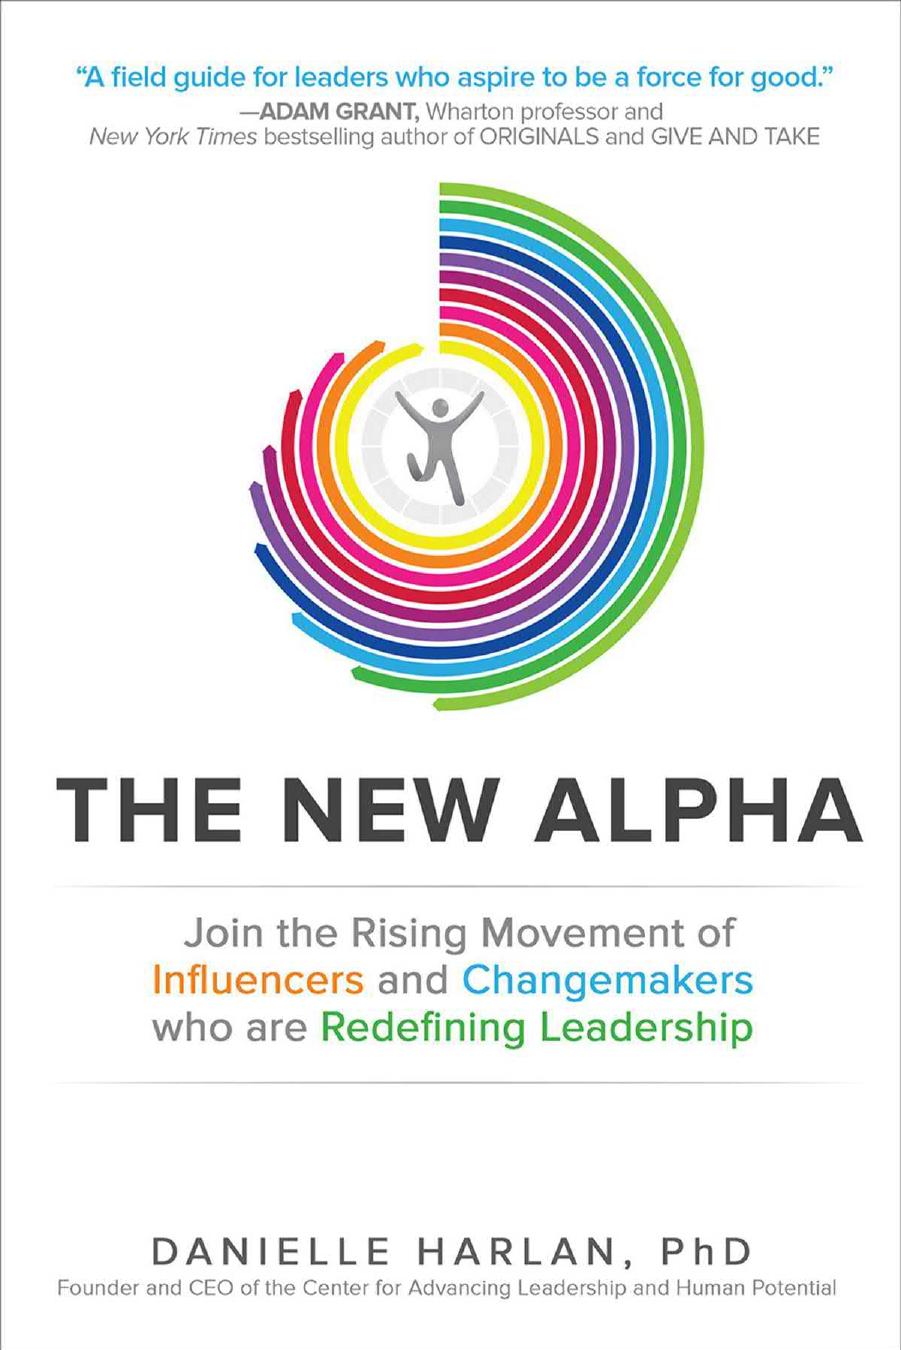 The New Alpha: Join the Rising Movement of Influencers and Changemakers Who Are Redefining Leadership by Danielle Harlan